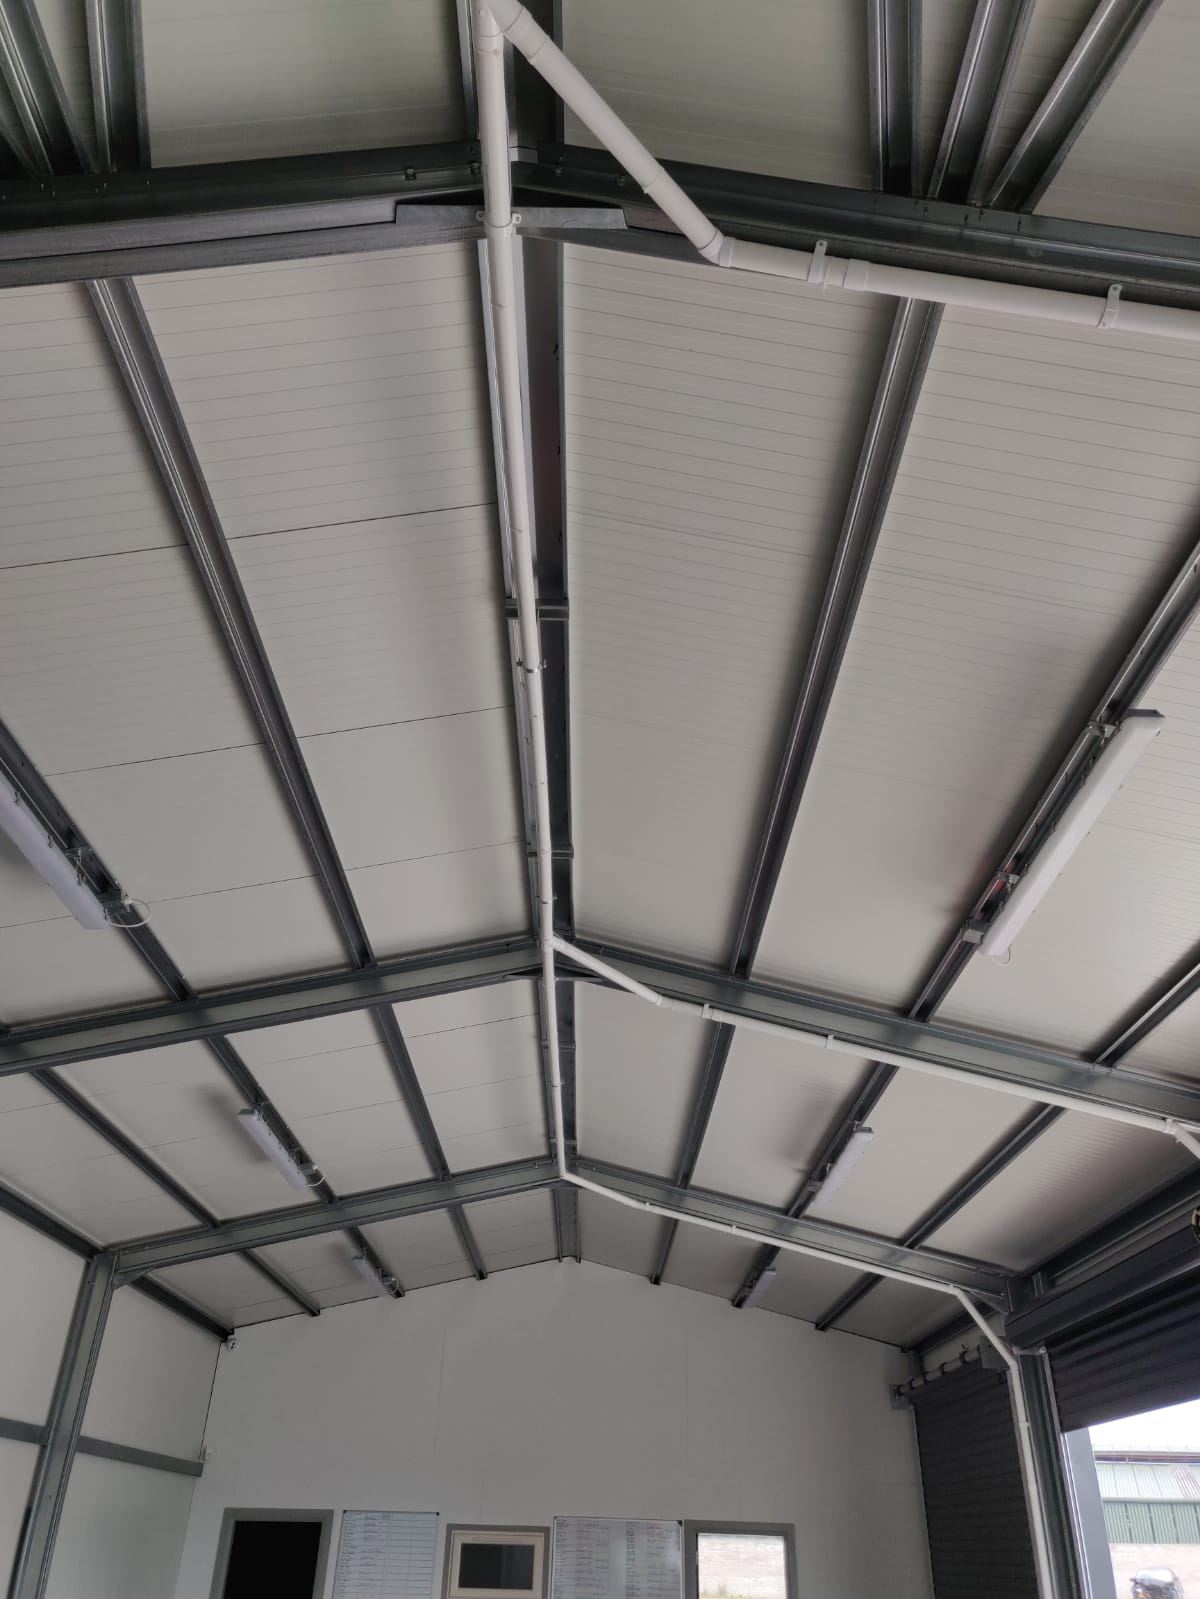 Beam Central Vacuum ducting on valeting bay garage ceiling